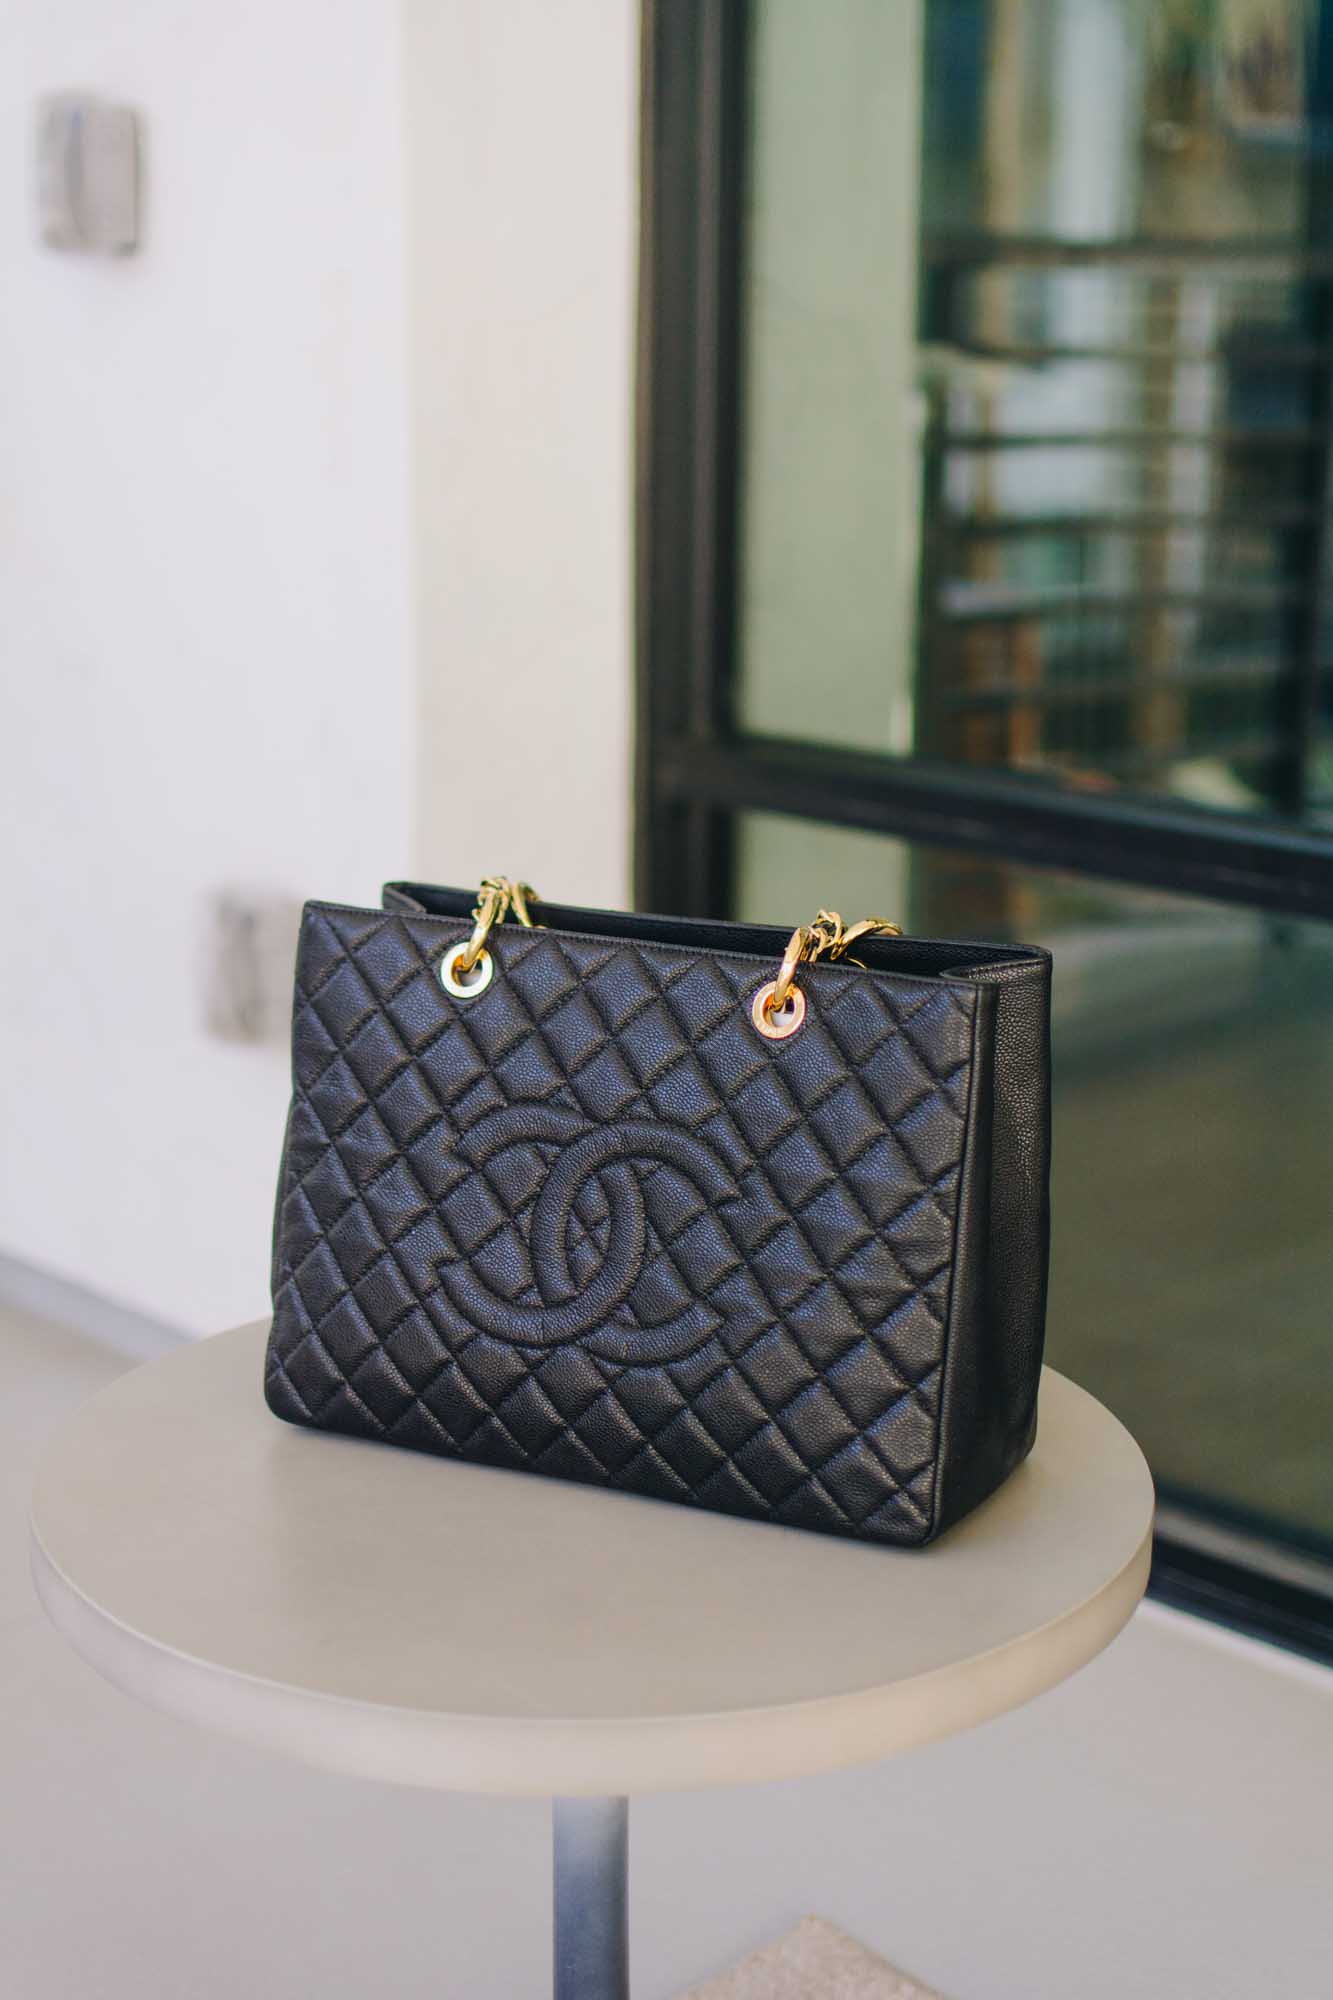 The front view of a Chanel GST in black caviar leather.